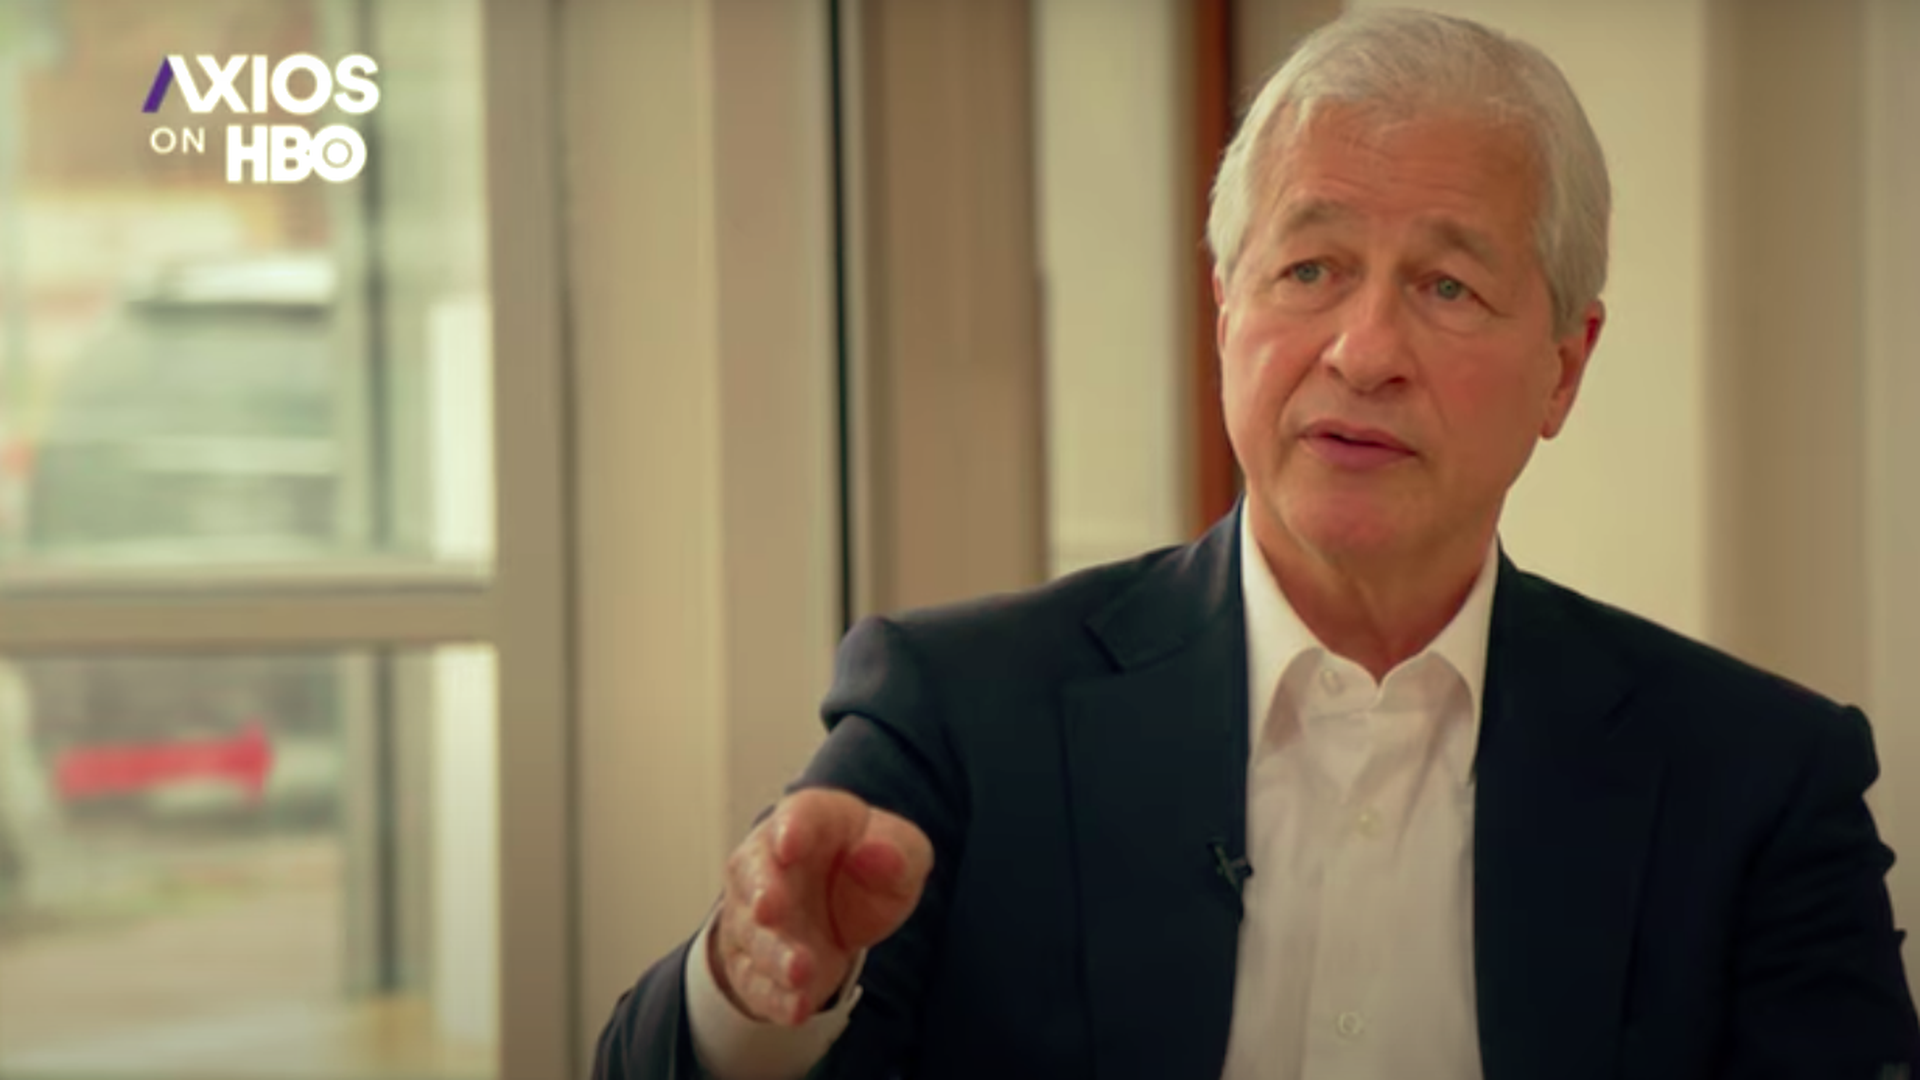 JPMorgan CEO Jamie Dimon in an interview on Axios on HBO